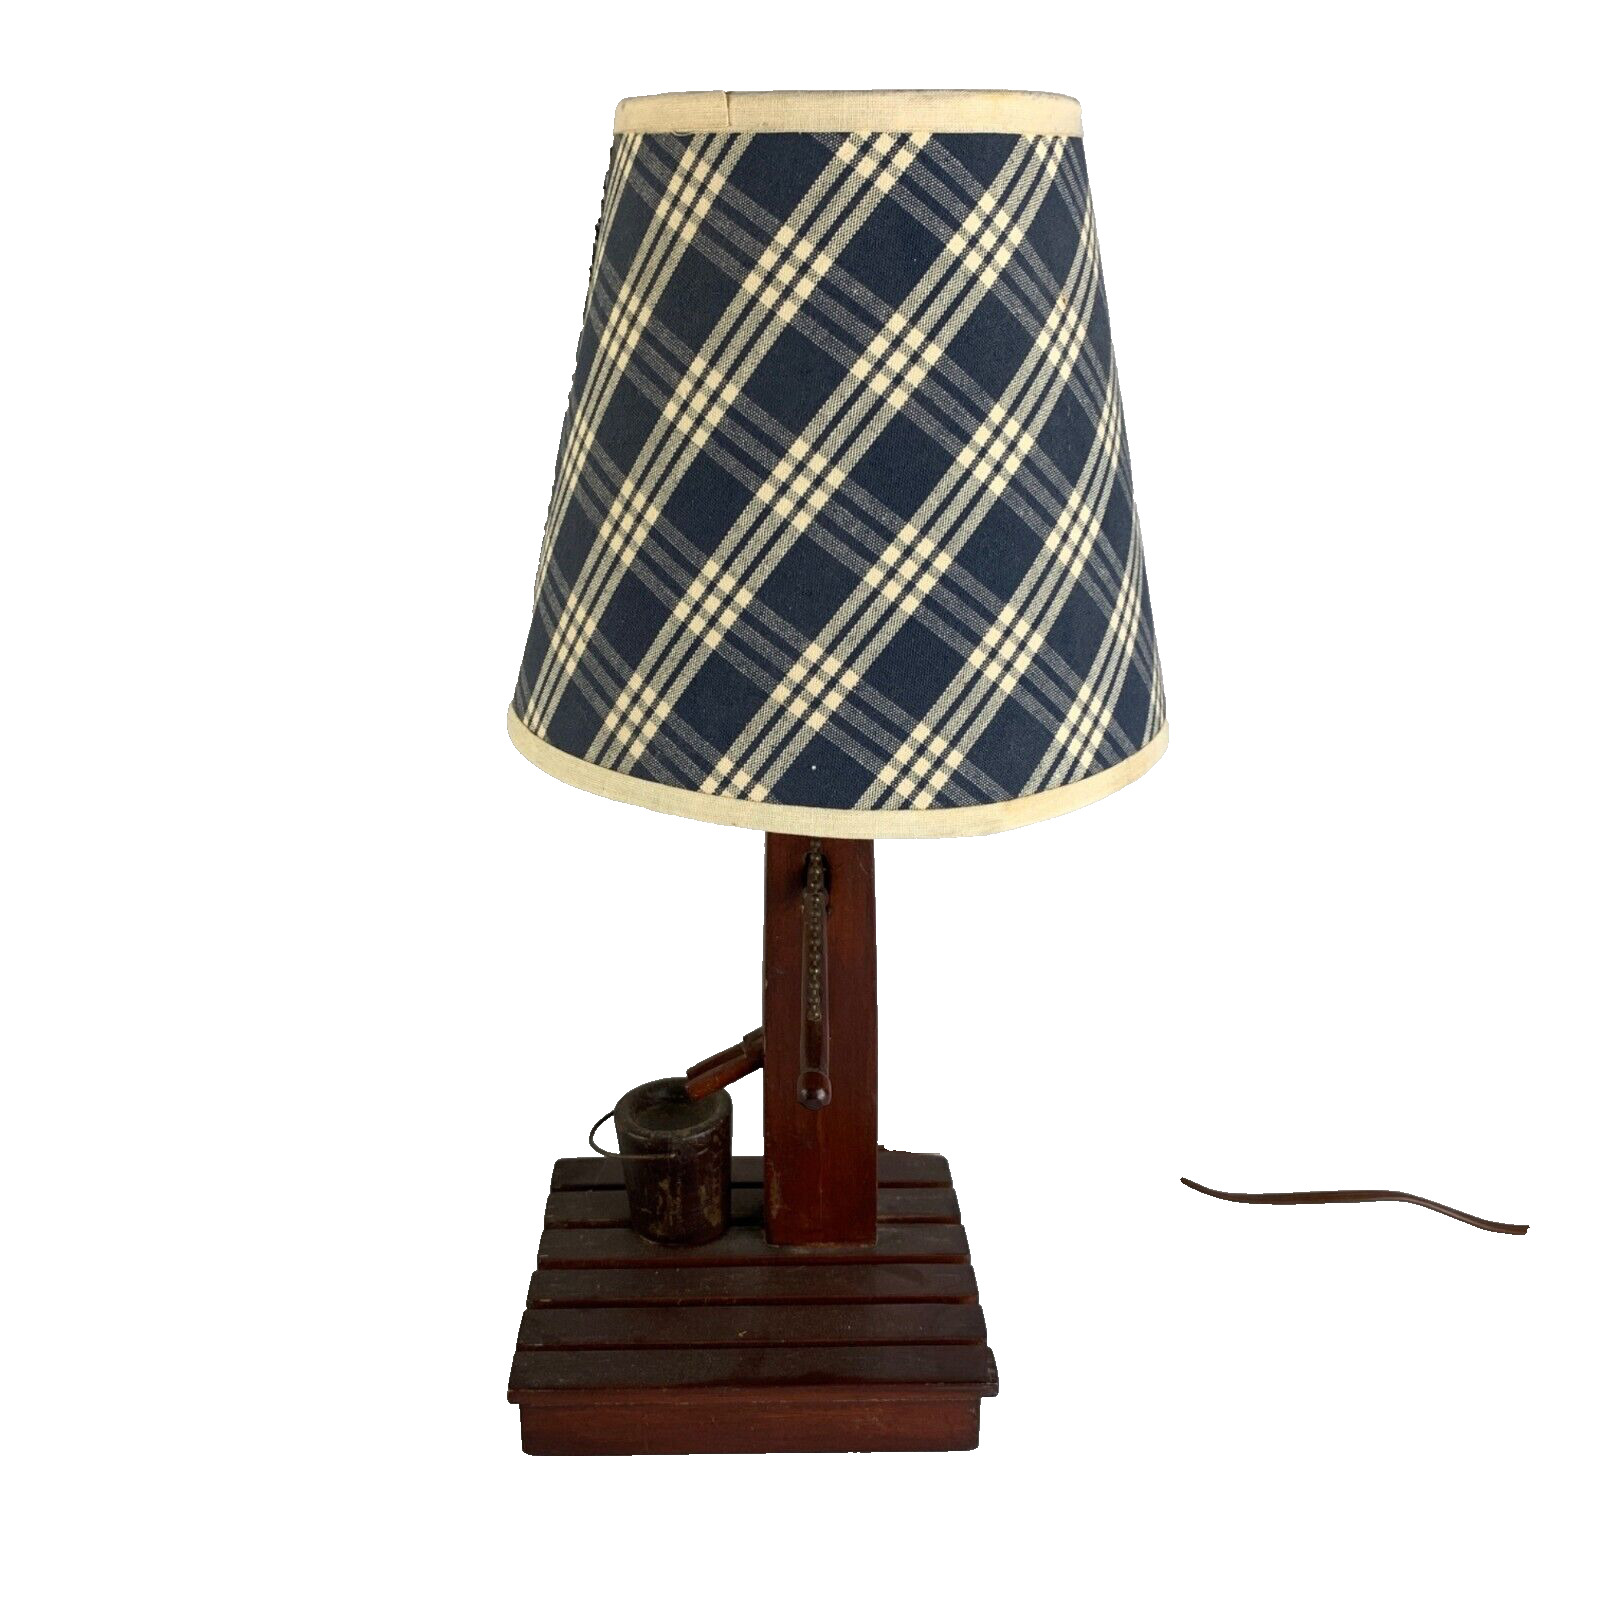 Vintage Wooden Wishing Well Table Lamp with Shade